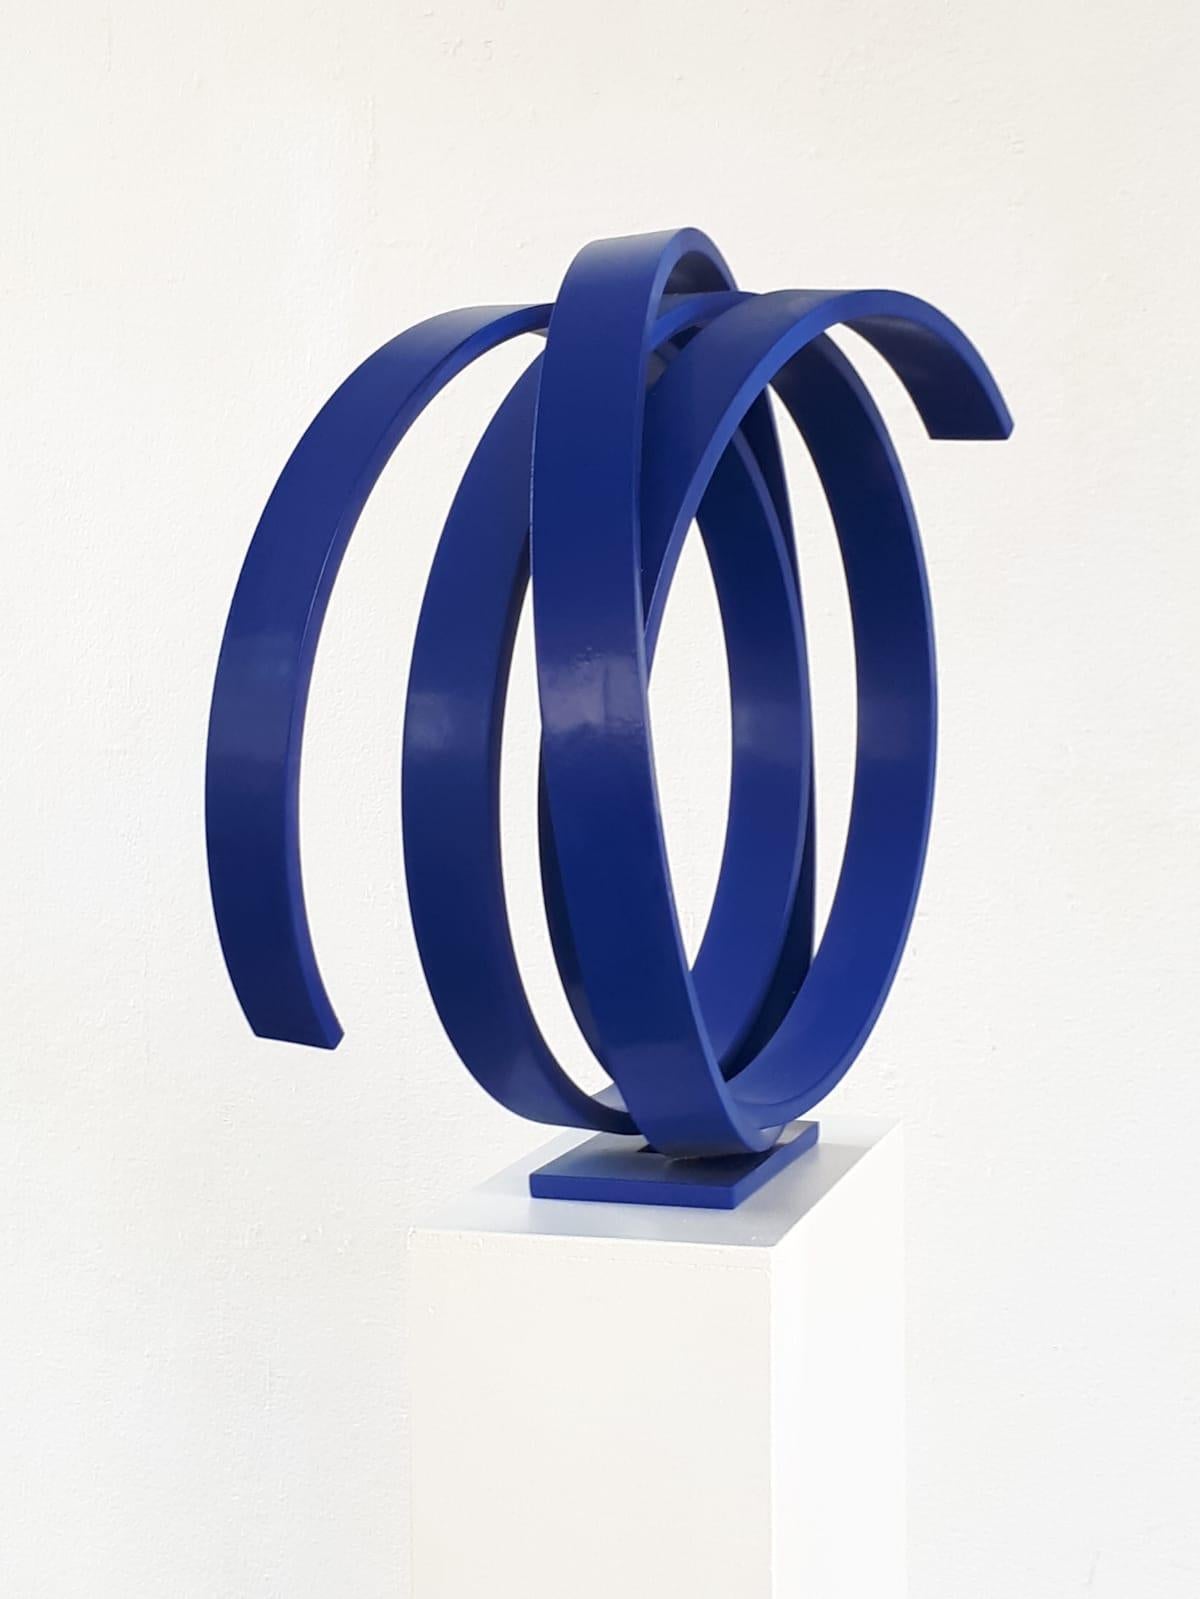 Artist: Kuno Vollet

Title: Blue Orbit

Materials: Stainless Steel

Size:  40cm x 40 cm x 25 cm

Variation of sculptures all individual

About the Gallery:
Folly and Muse was established in 2015 in London to find and collaborate with the most